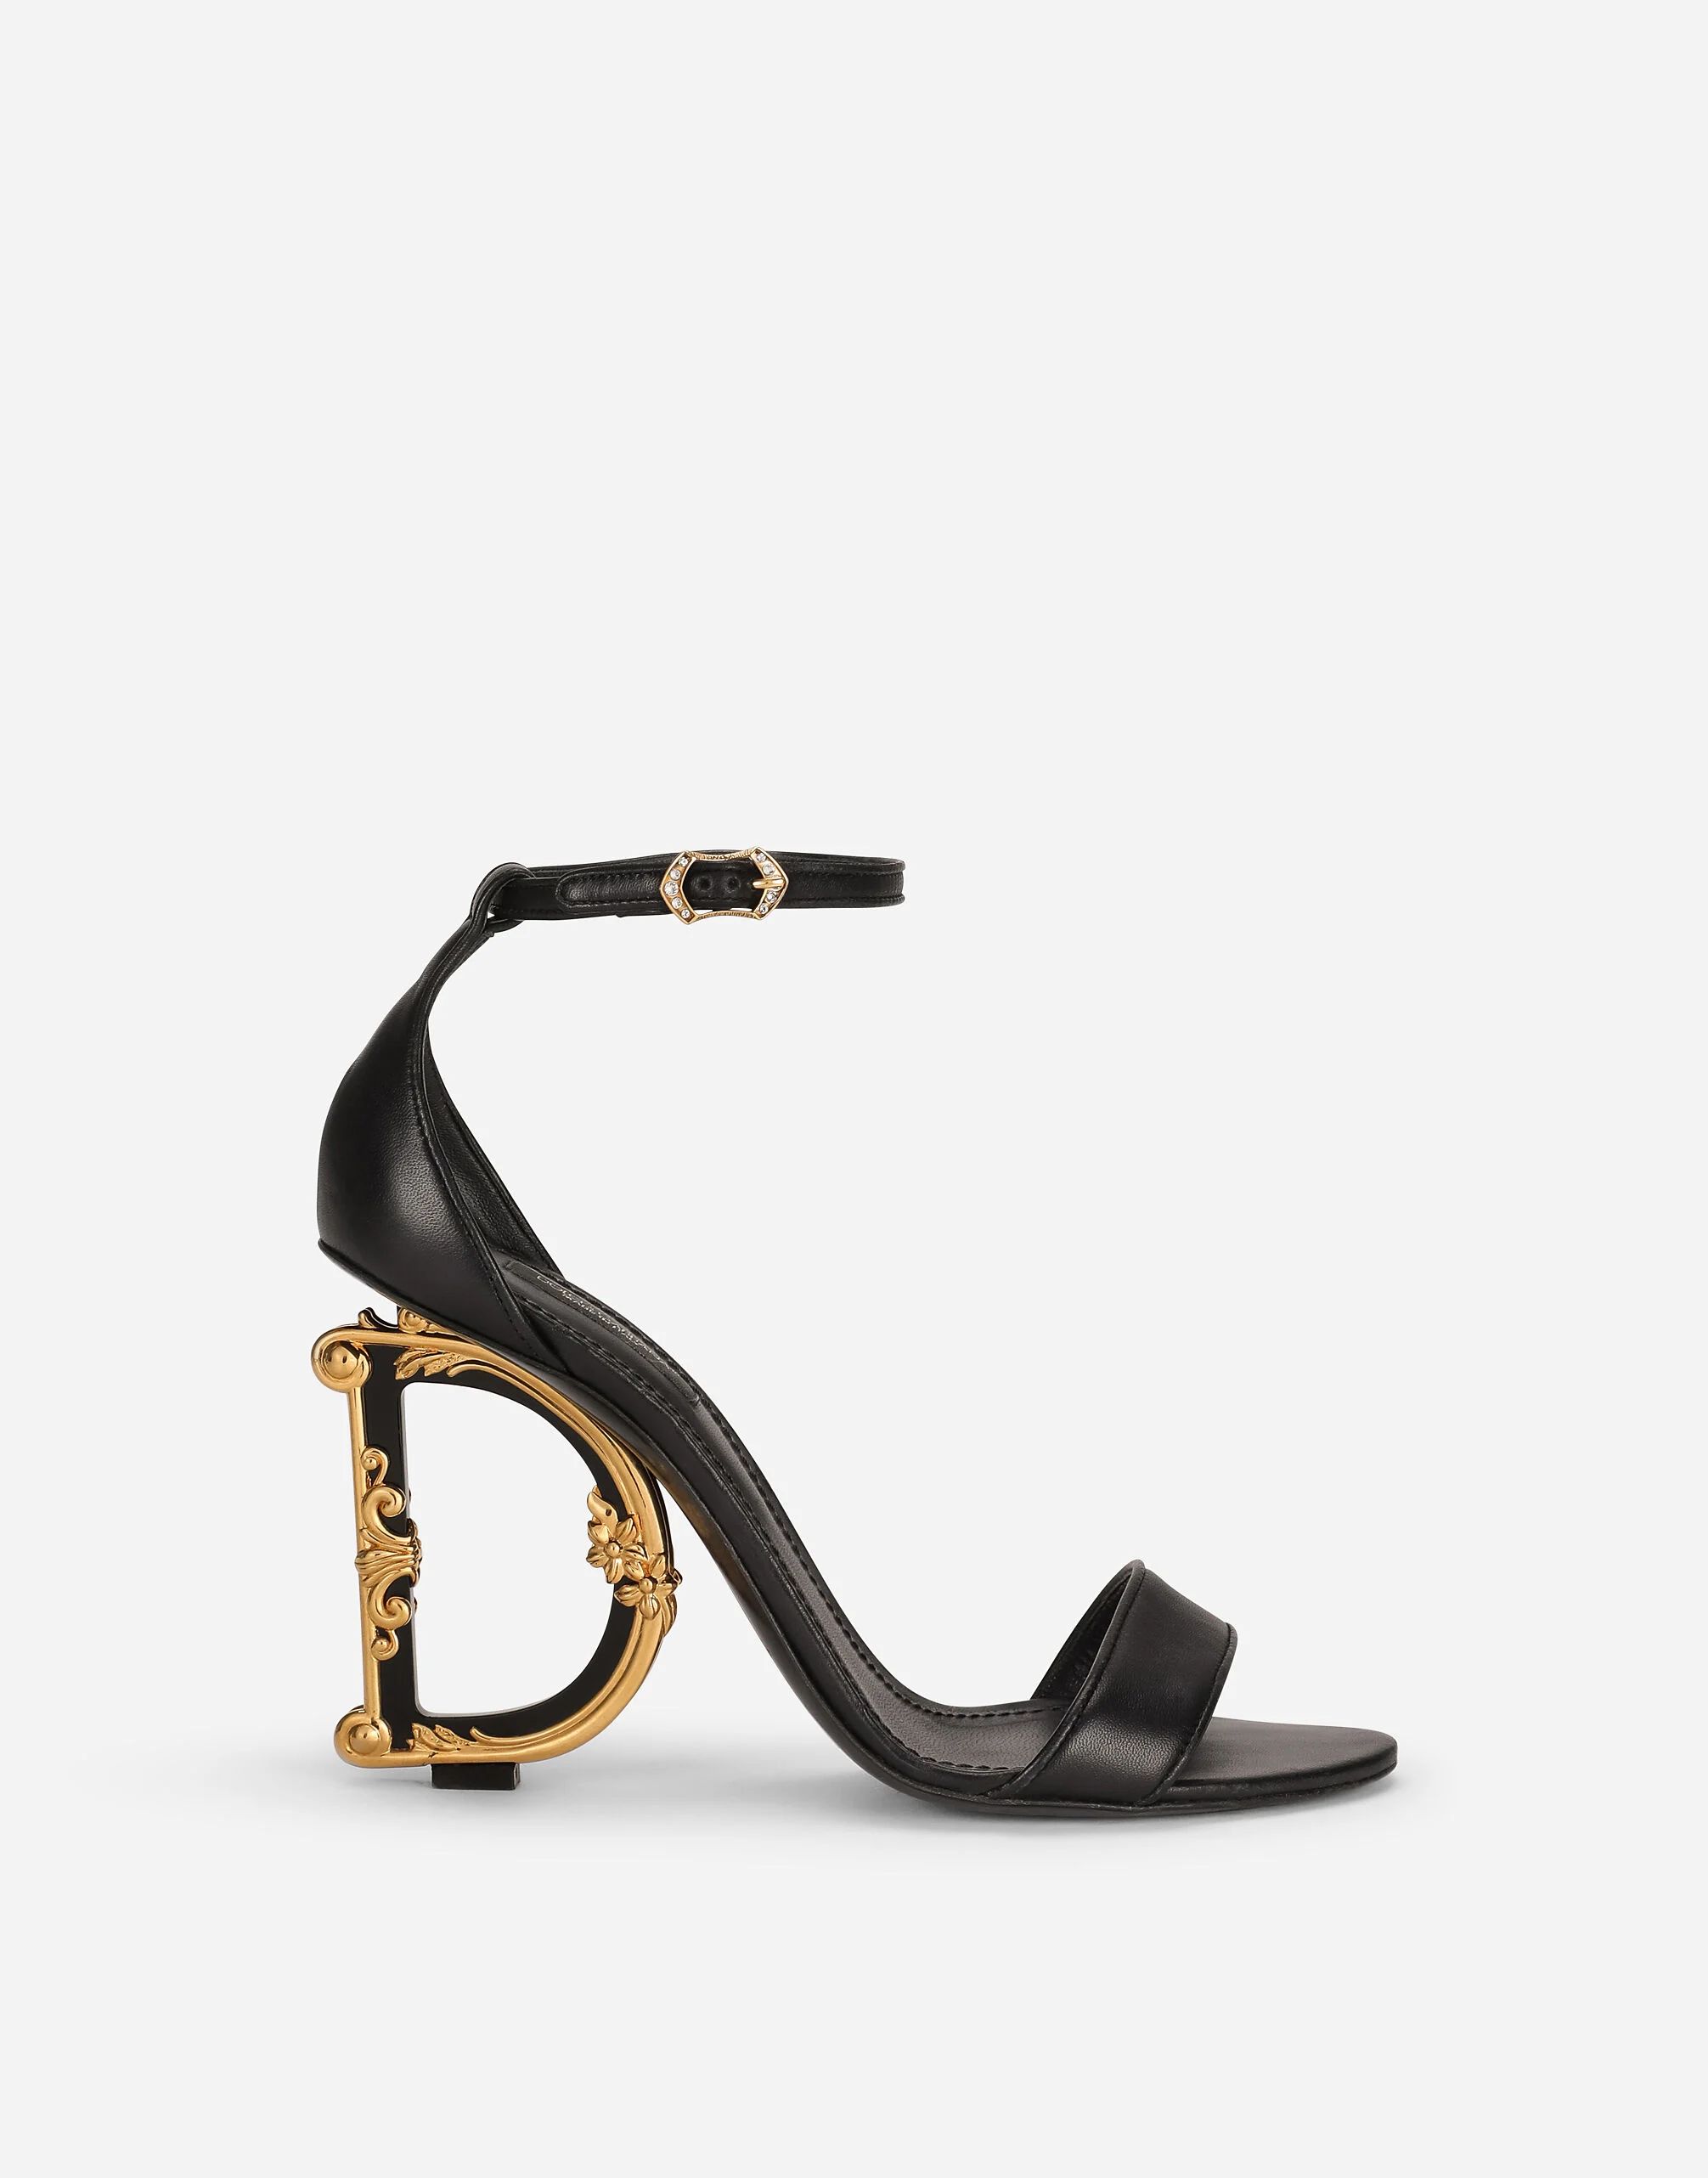 Nappa leather sandals with baroque DG detail | Dolce & Gabbana